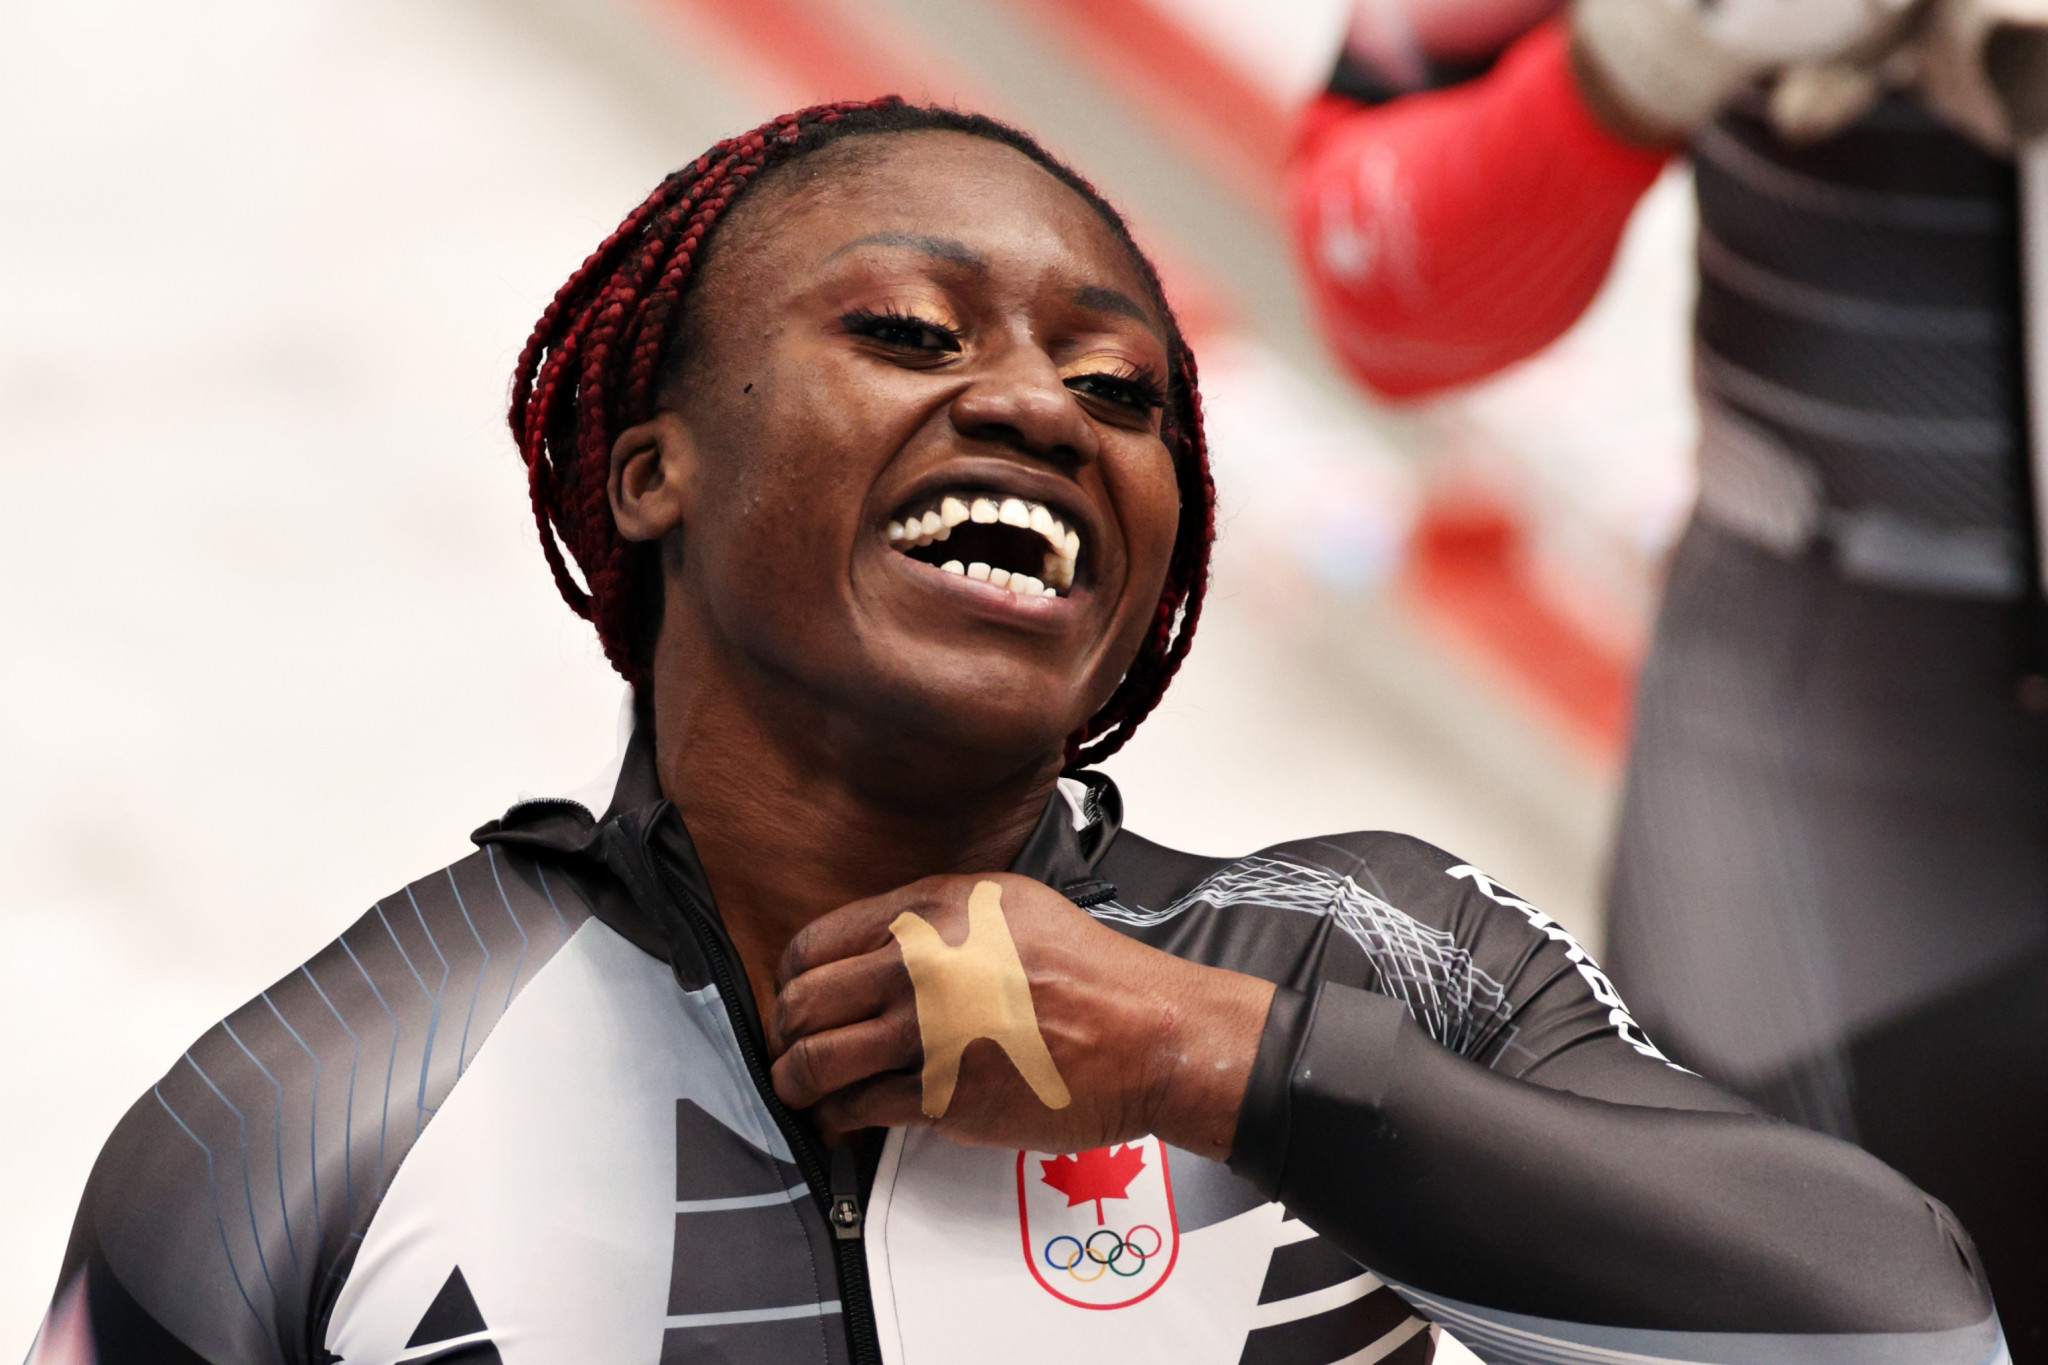 Cynthia Appiah has also been critical of Bobsleigh Canada Skeleton's selection process ©Getty Images